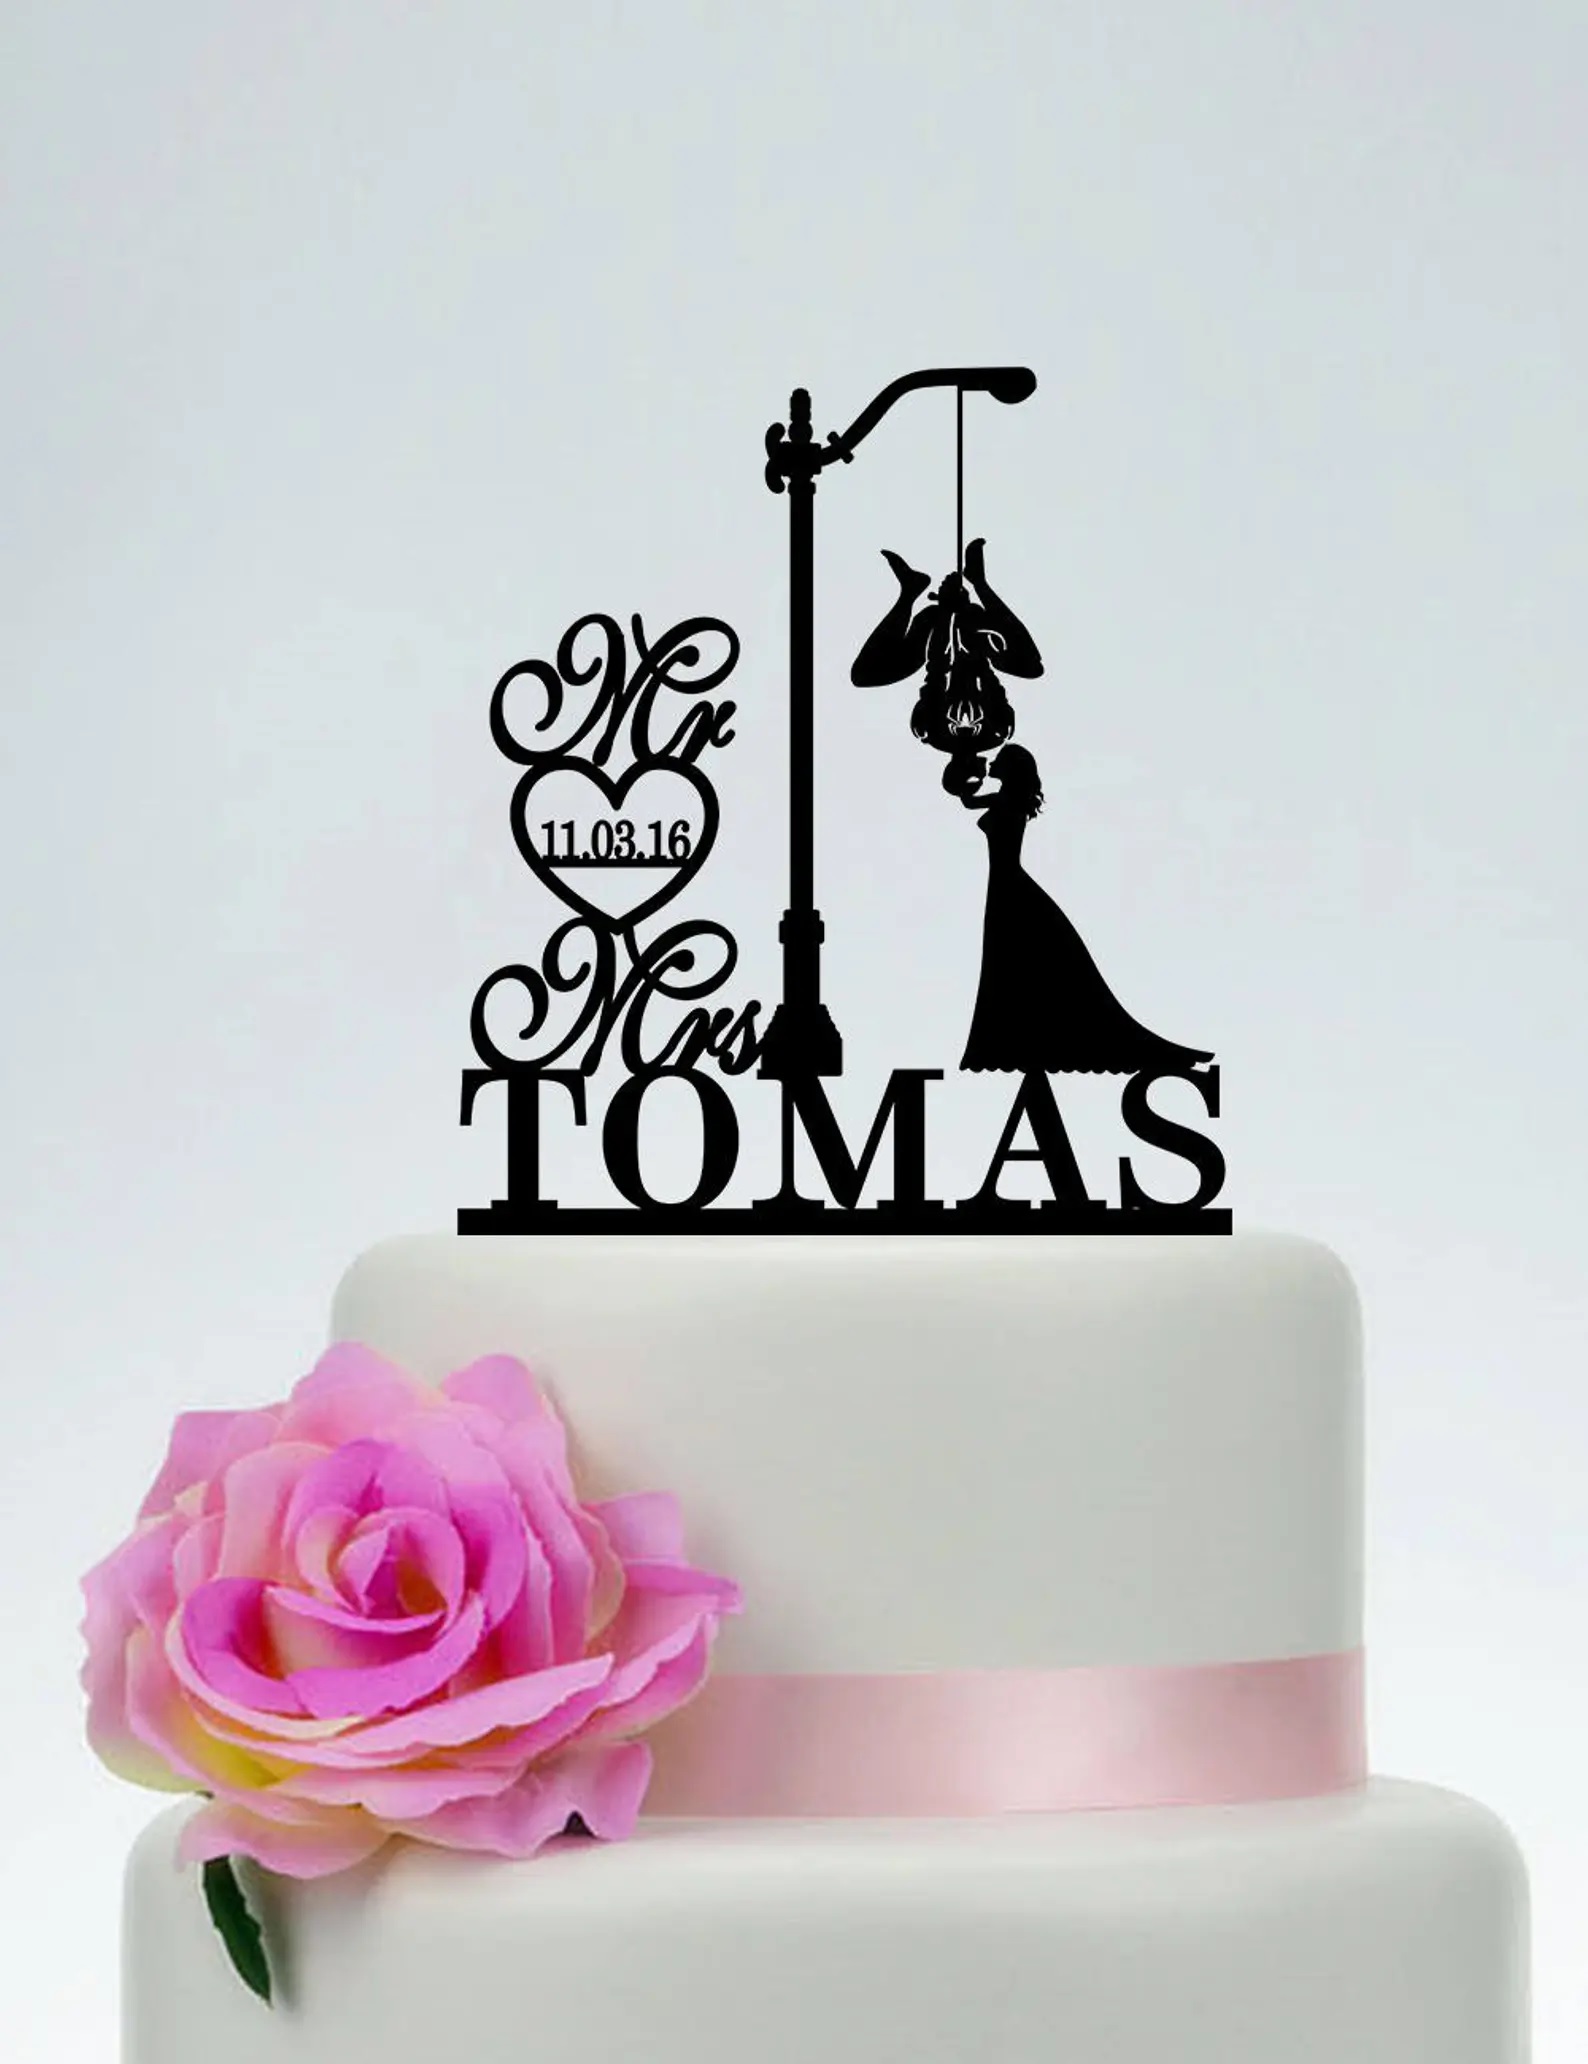 A silhouette cake topper featuring a woman in a long dress kissing Spider-Man, who is hanging upside down from a lamppost beside the couple's name and wedding date